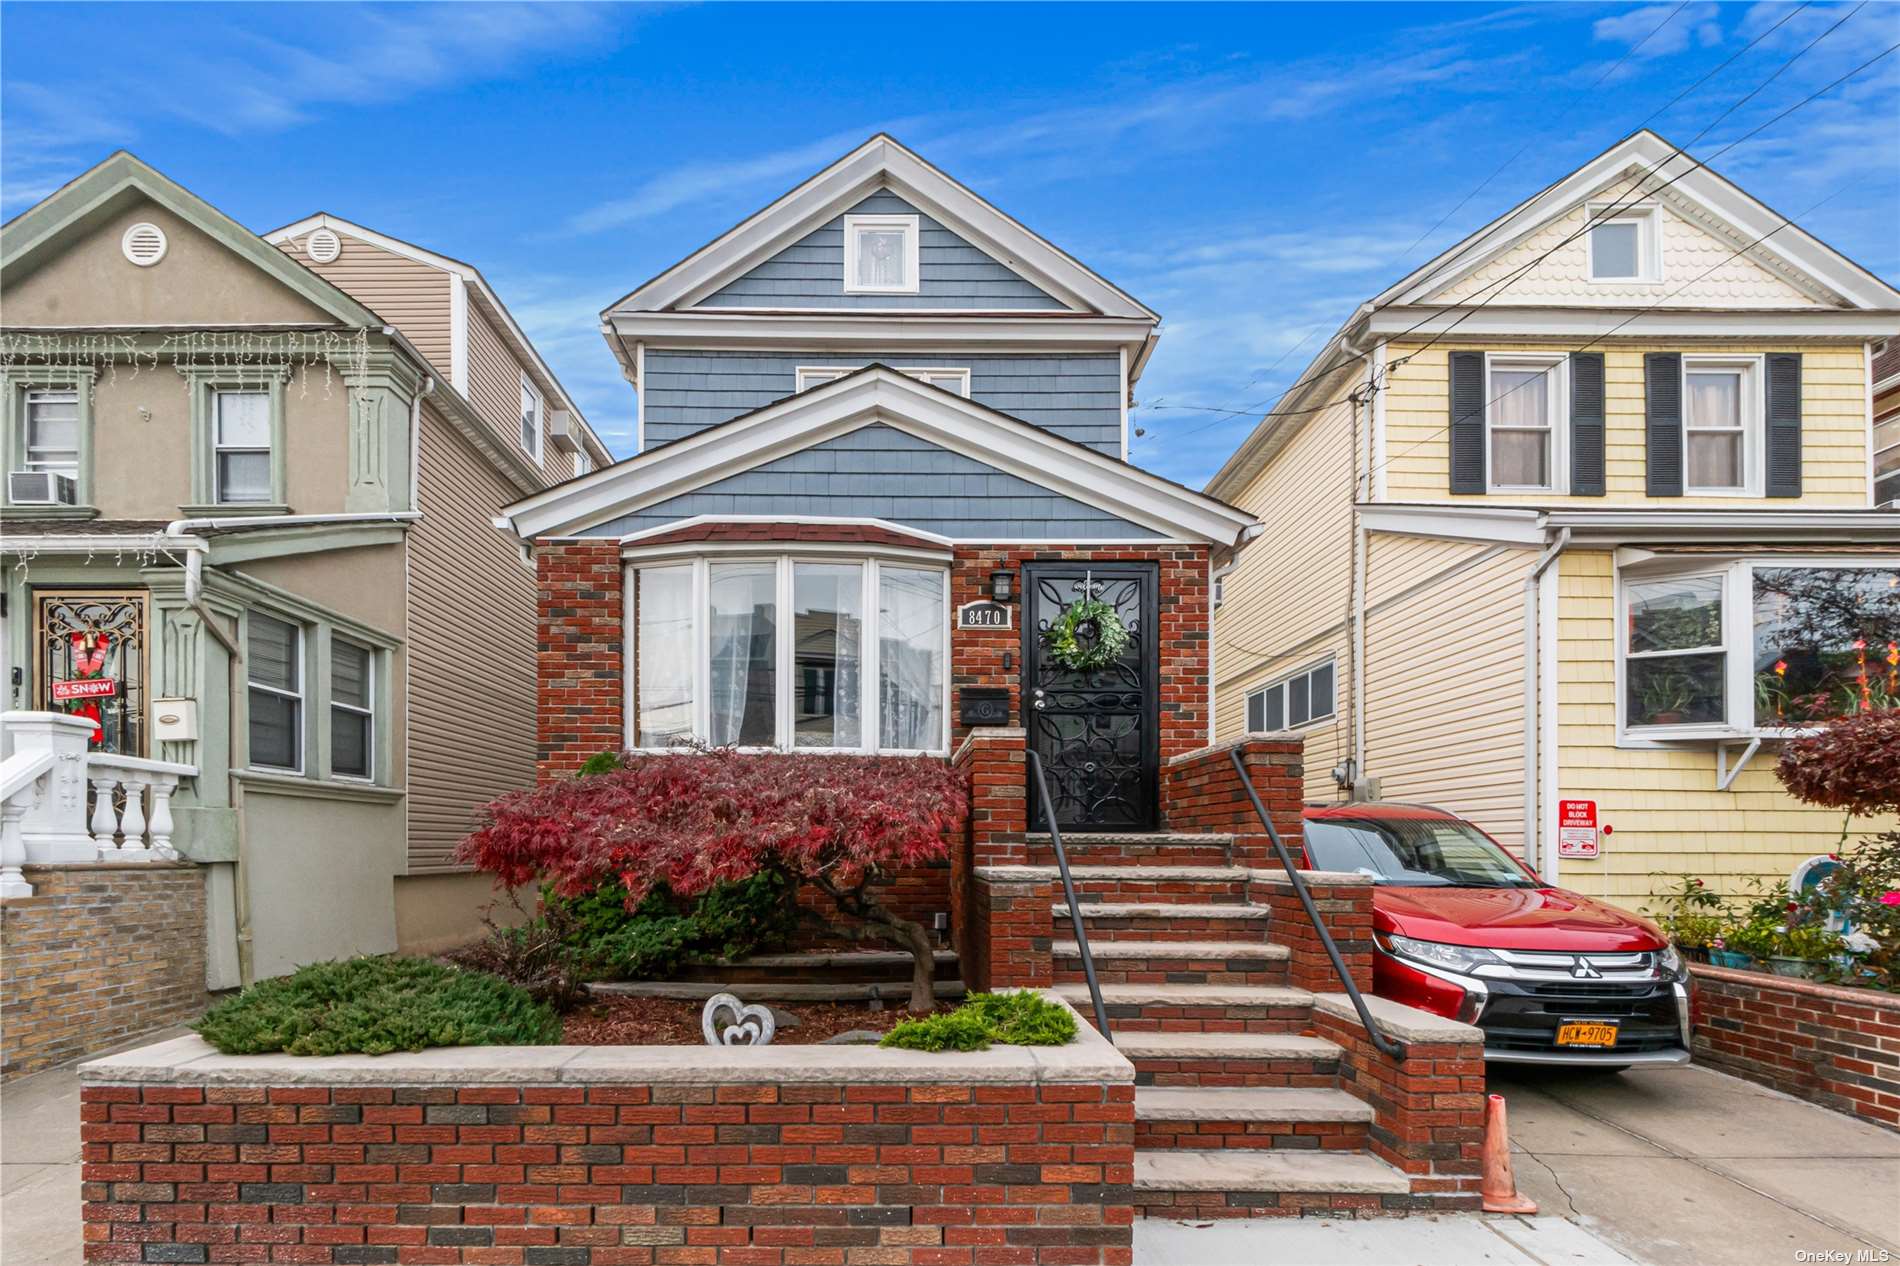 Single Family in Kew Gardens - 130th  Queens, NY 11415